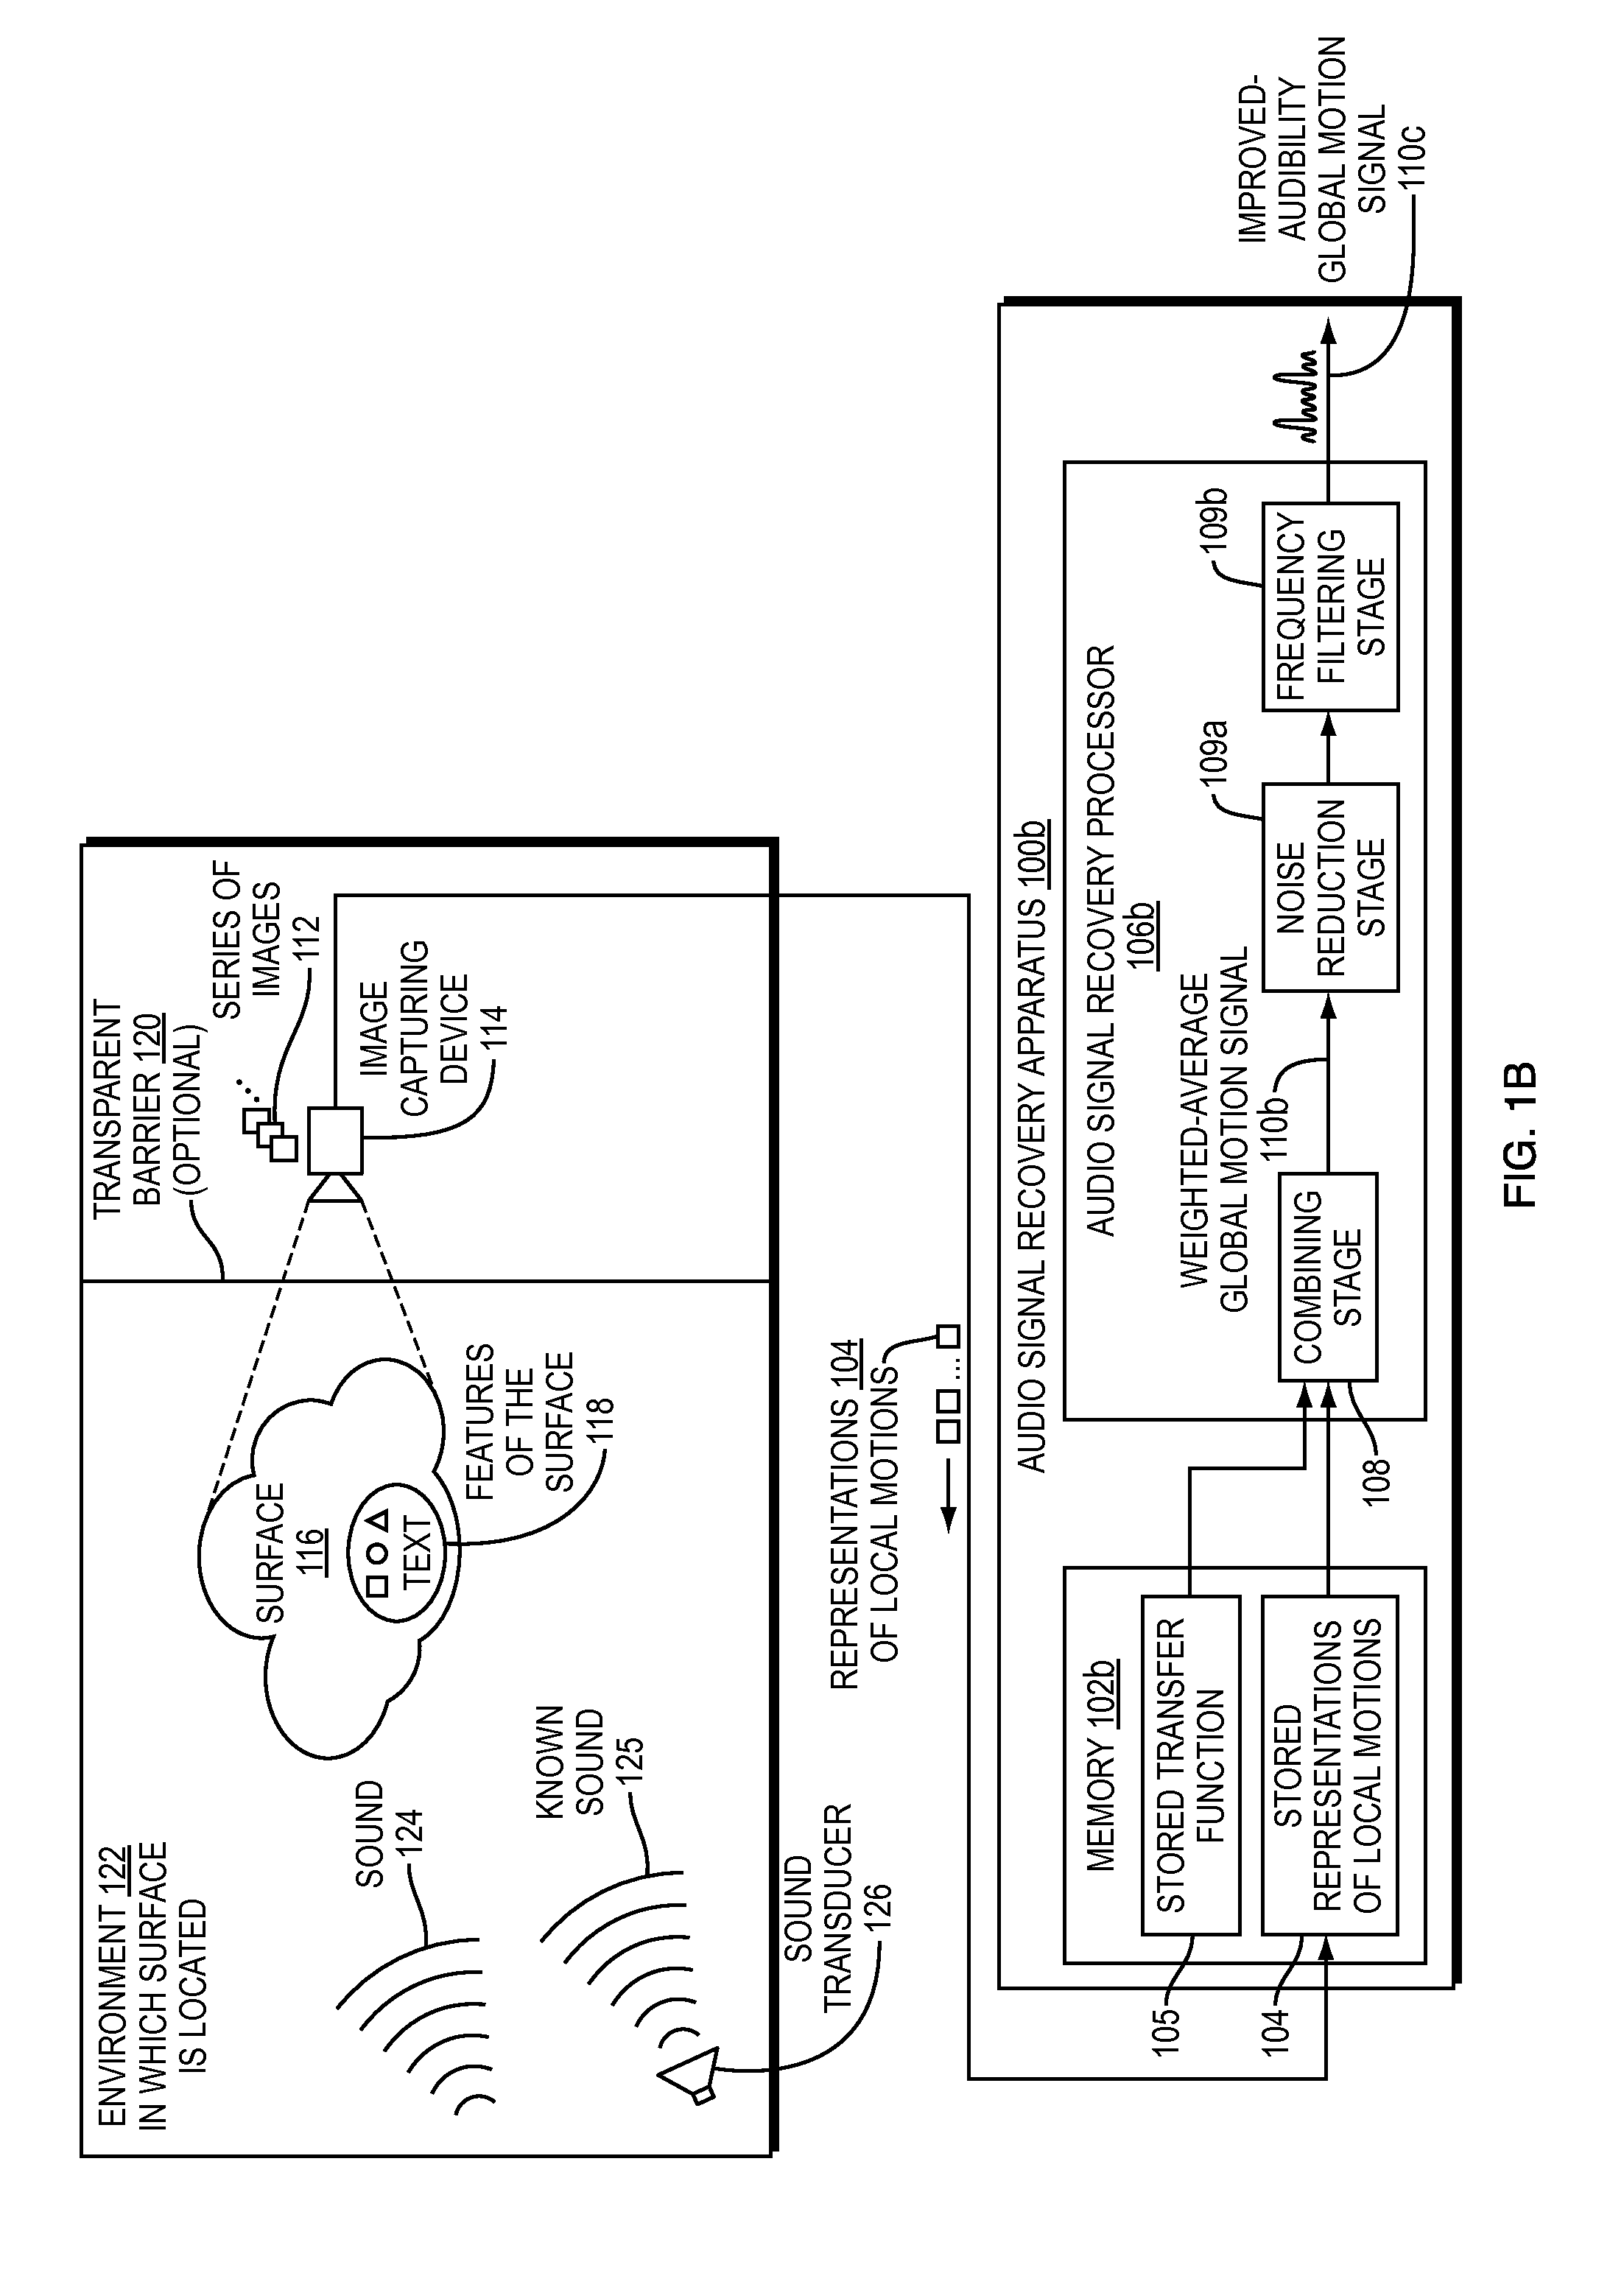 Method and Apparatus for Recovering Audio Signals from Images